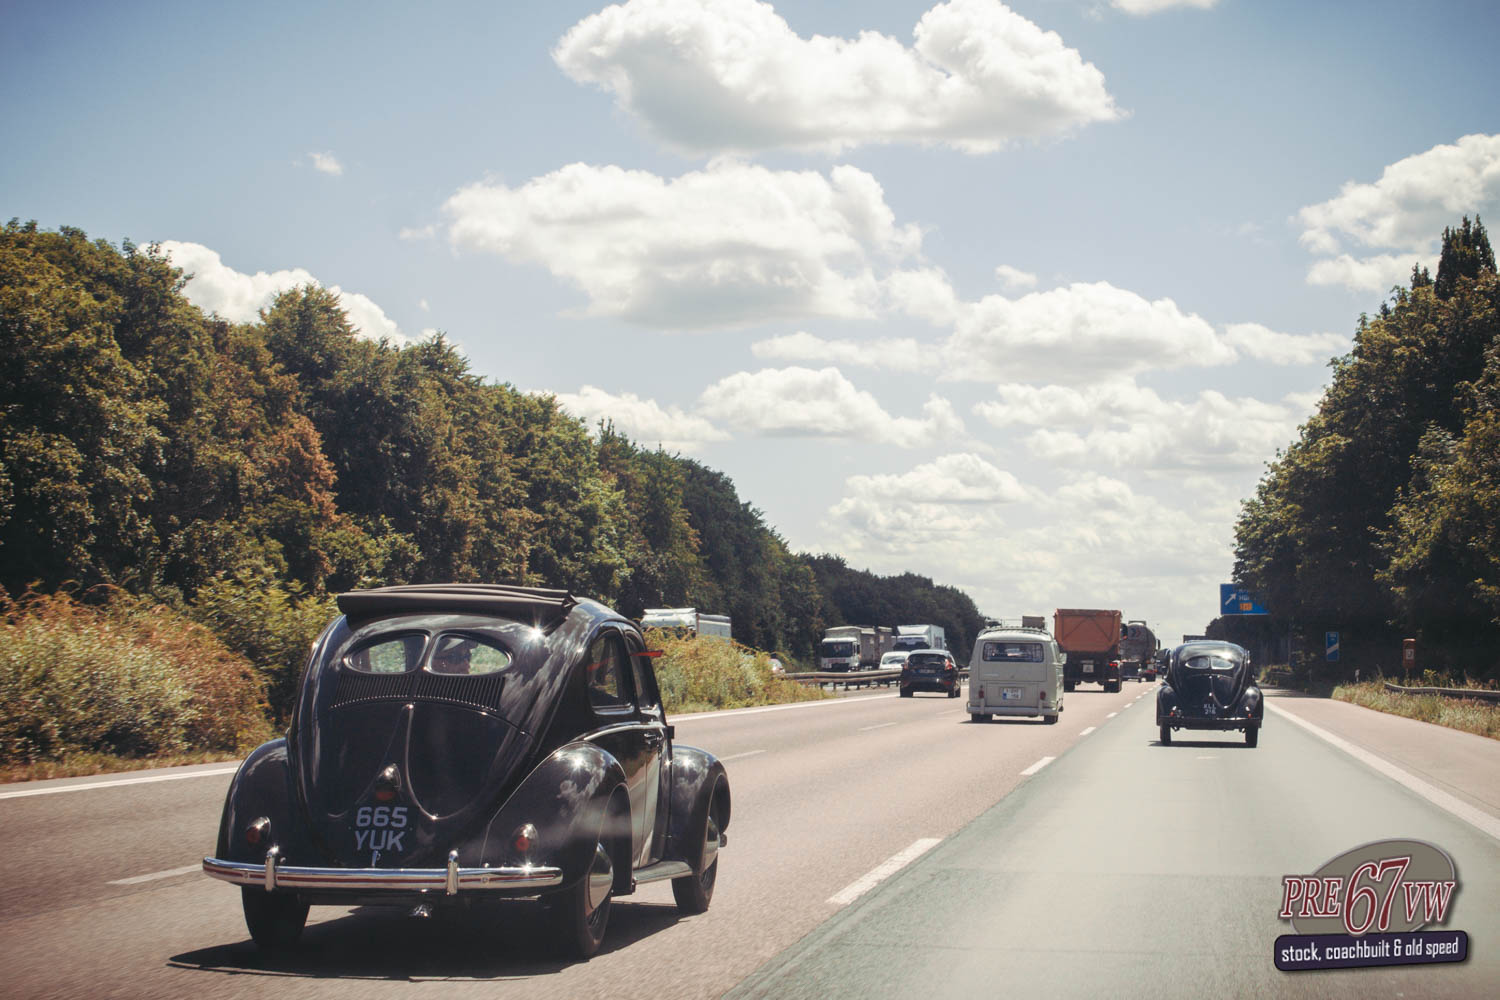 1952 Split Window Sunroof Beetle driving at BBT Convoy to Bad Camberg 2019